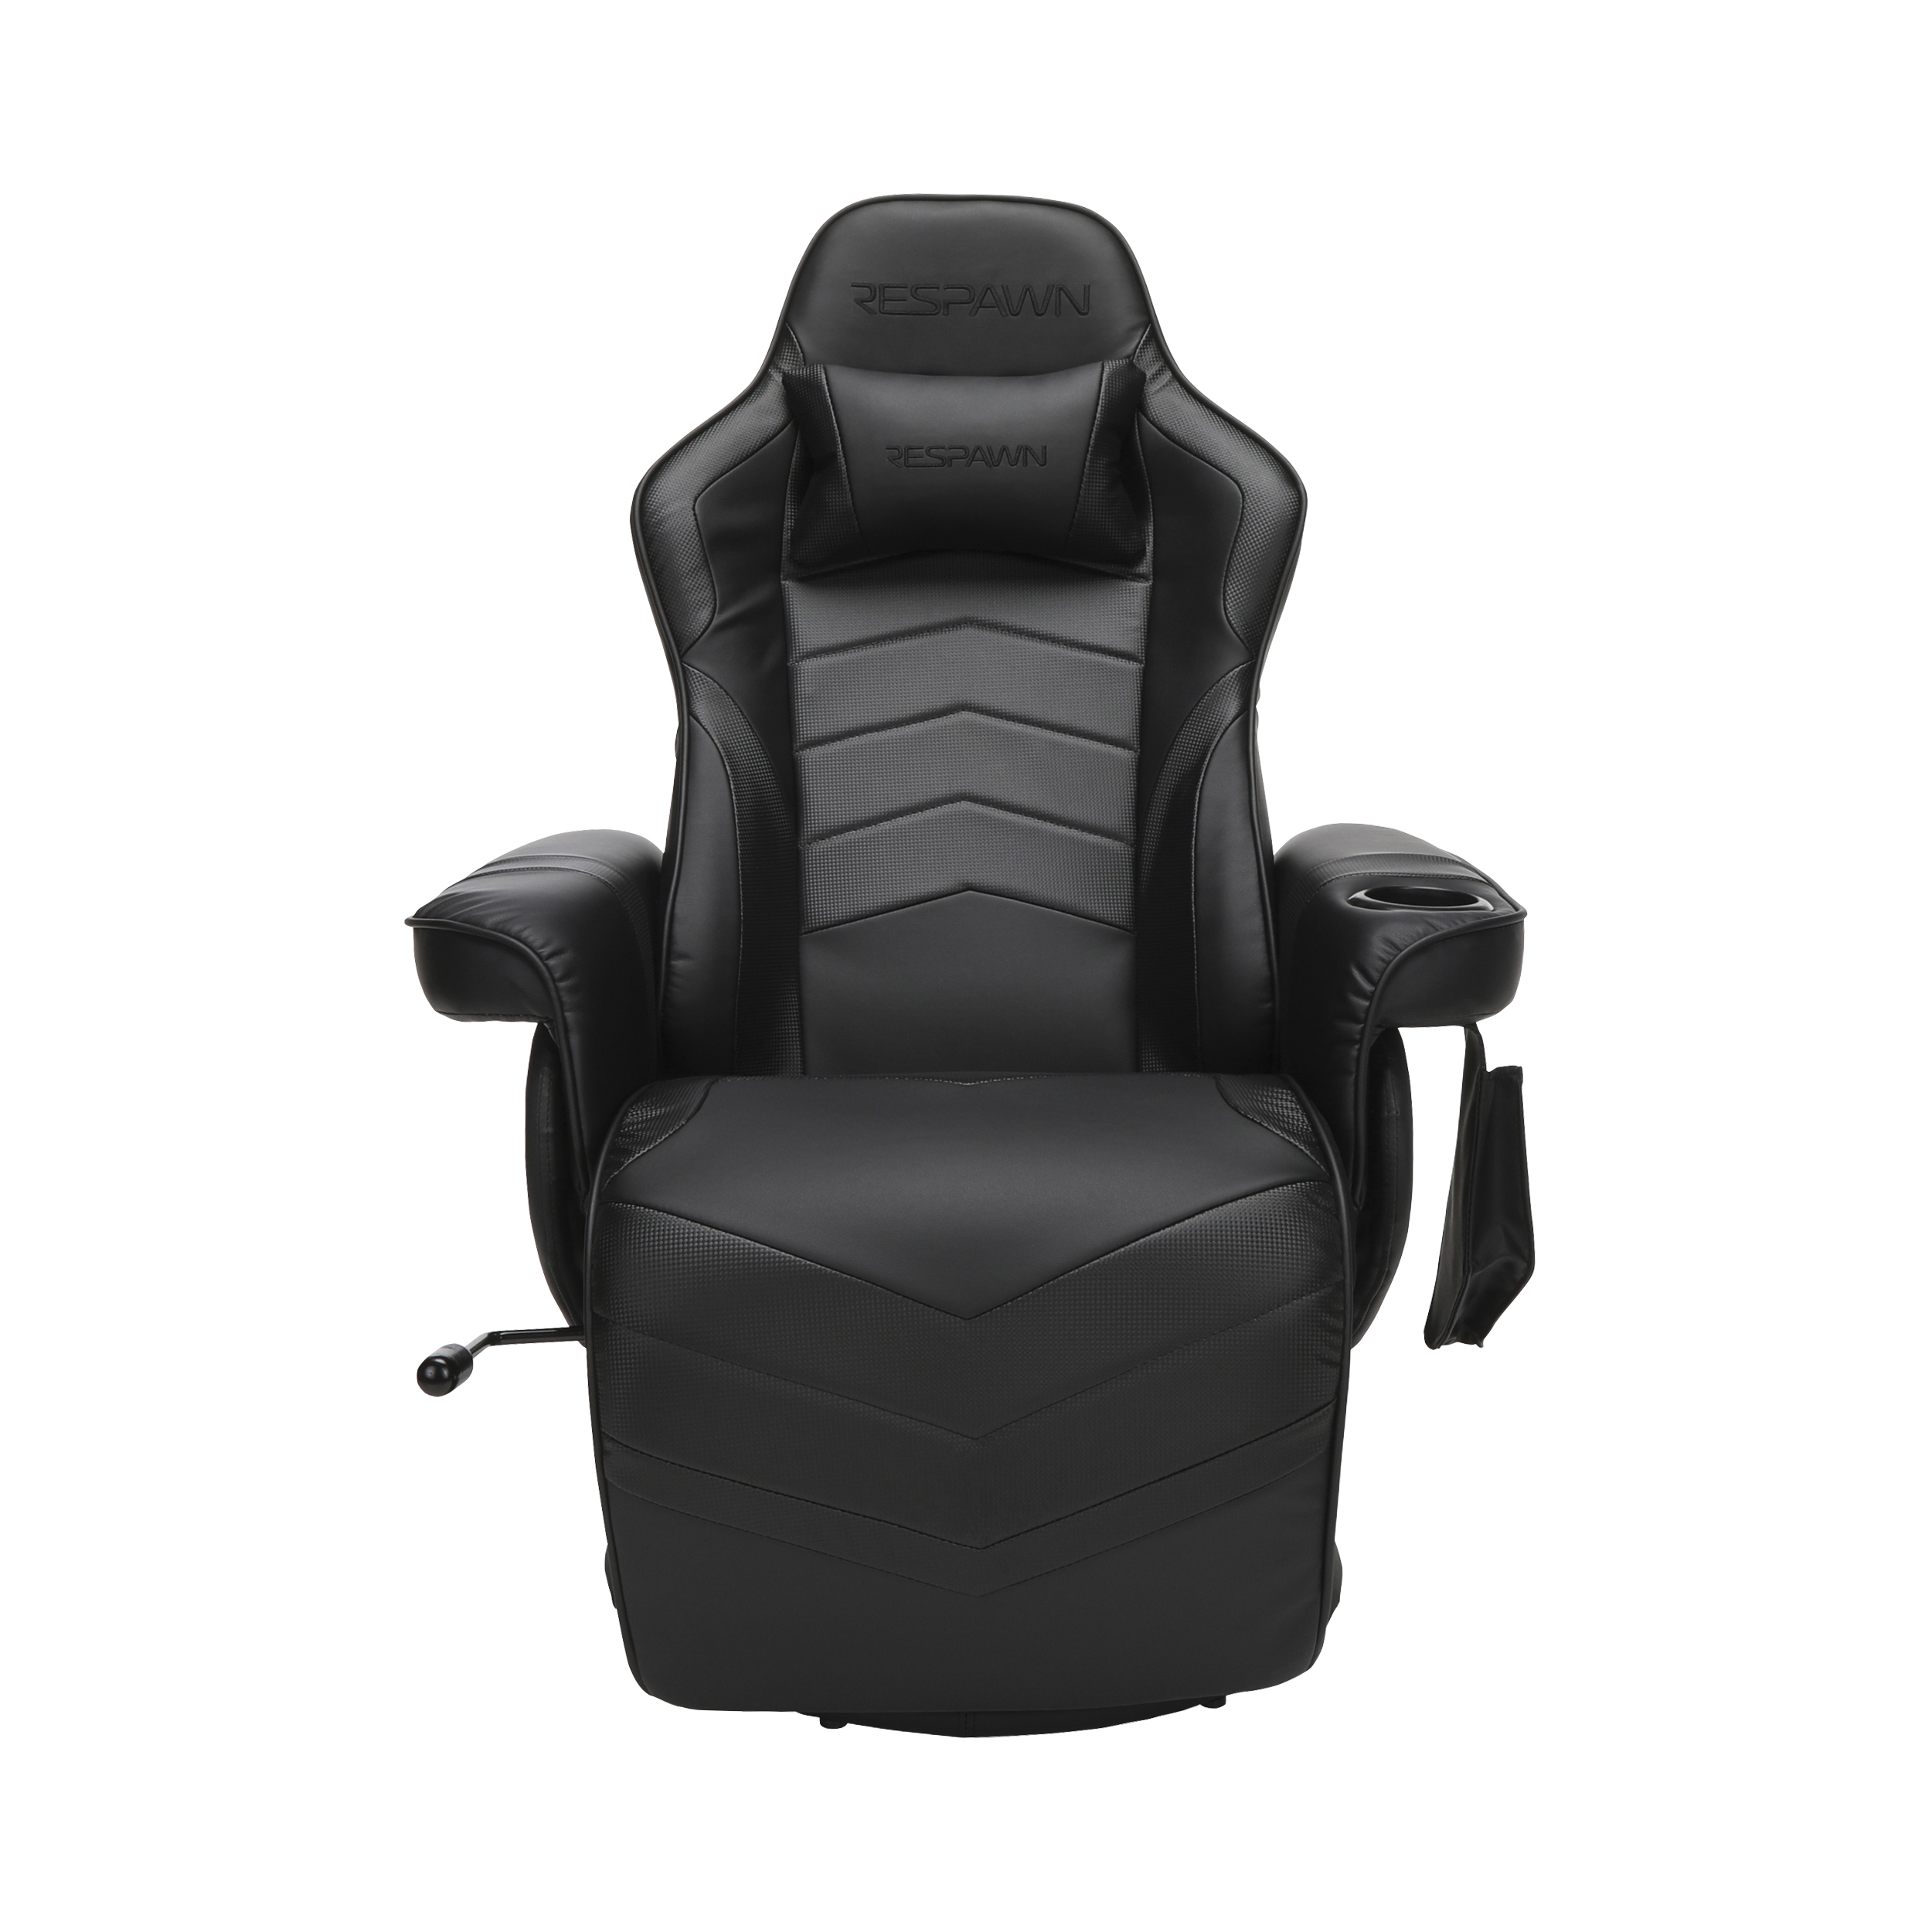 RESPAWN 900 Gaming Recliner - Video Games Console Recliner Chair, Computer Recliner, Adjustable Leg Rest and Recline, Recliner with Cupholder, Reclining Gaming Chair with Footrest - Black - image 3 of 10